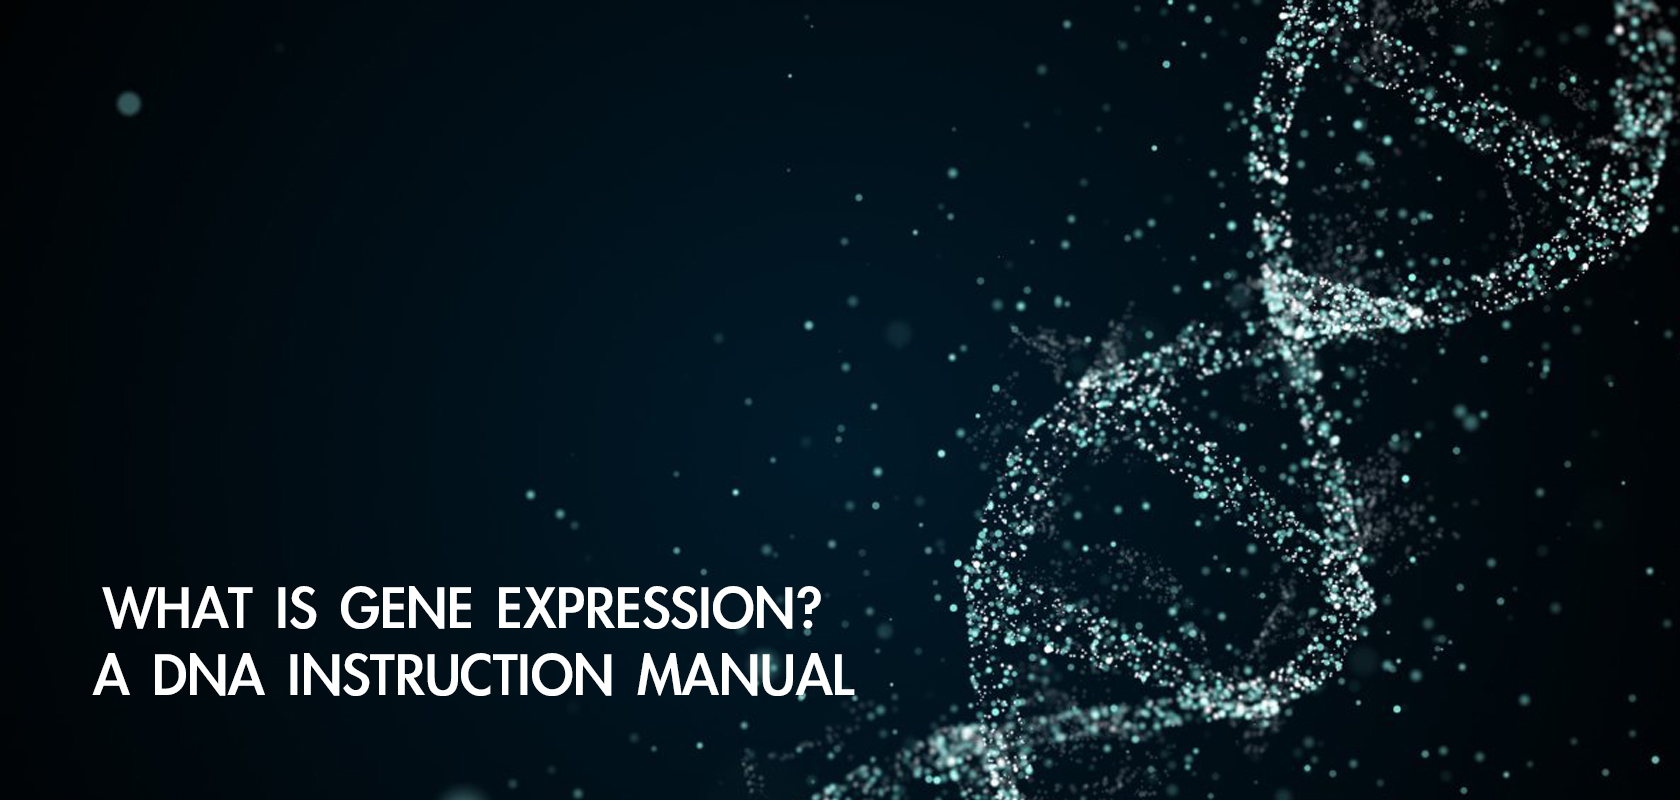 WHAT IS GENE EXPRESSION? A DNA INSTRUCTION MANUAL